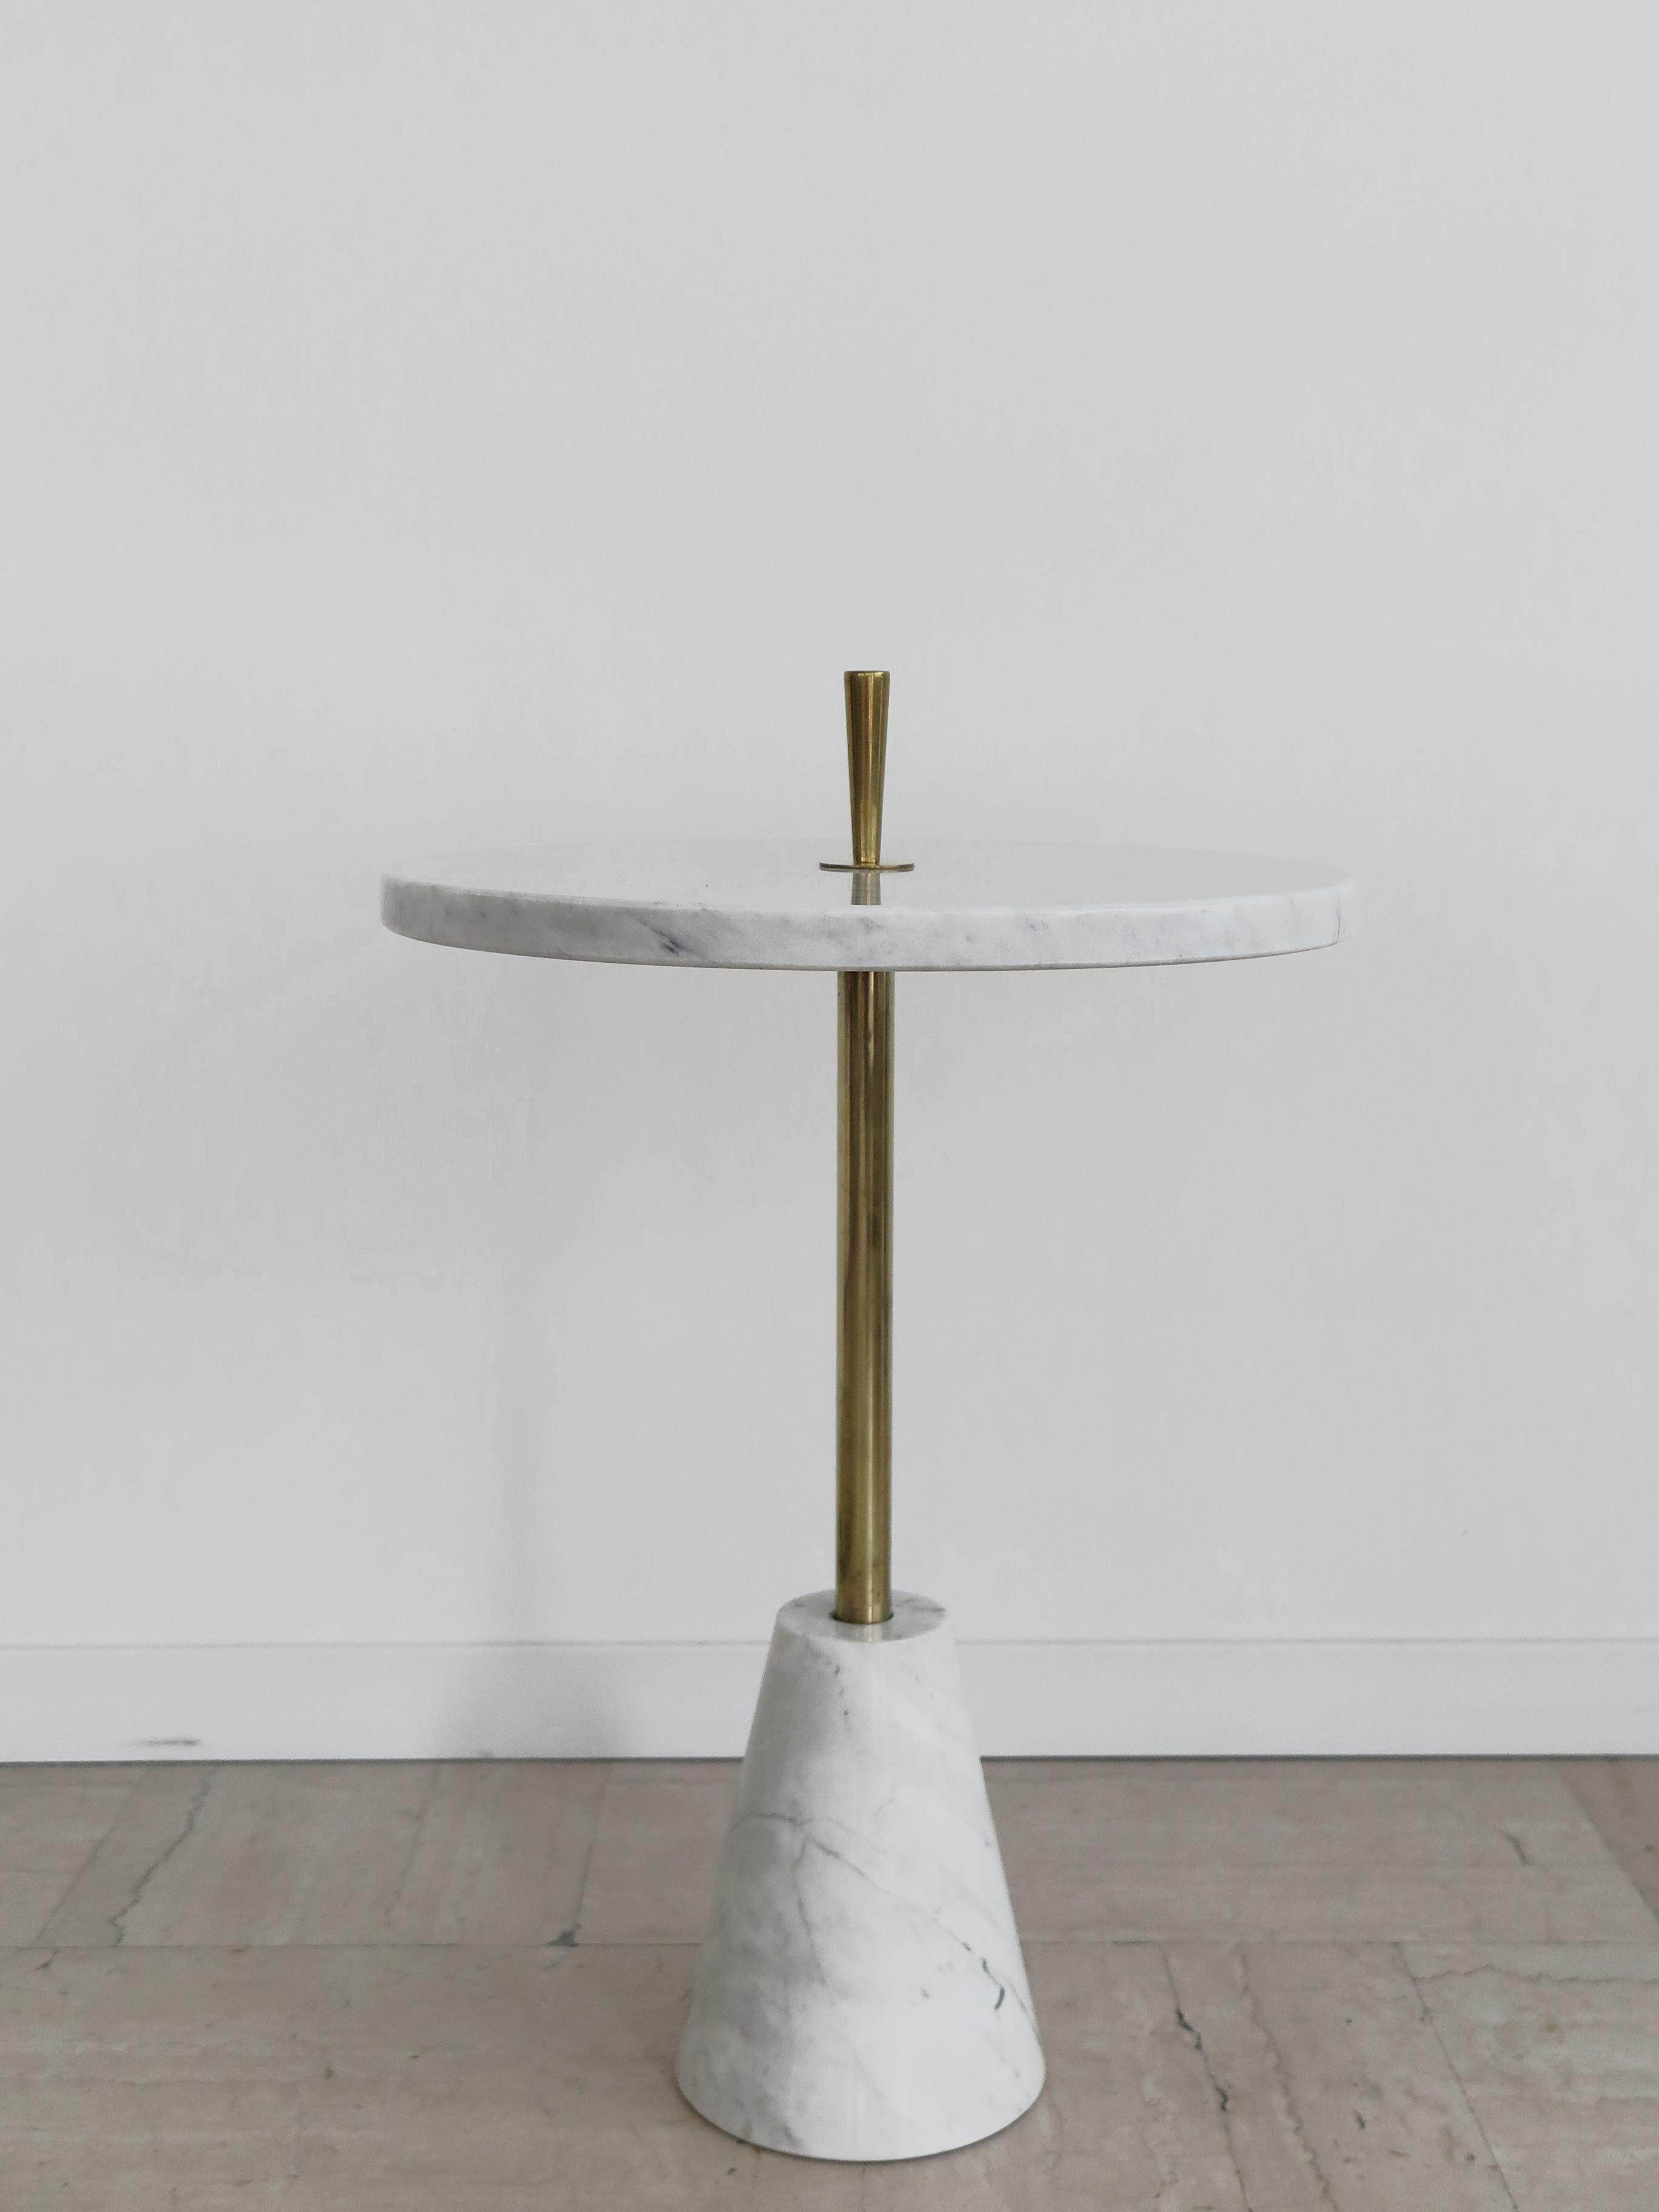 Italian original vintage coffee table with base and top in white Carrara marble, stem and handle in brass, production, Italy, 1970s

Please note that the table is original of the period and this shows normal signs of age and use.